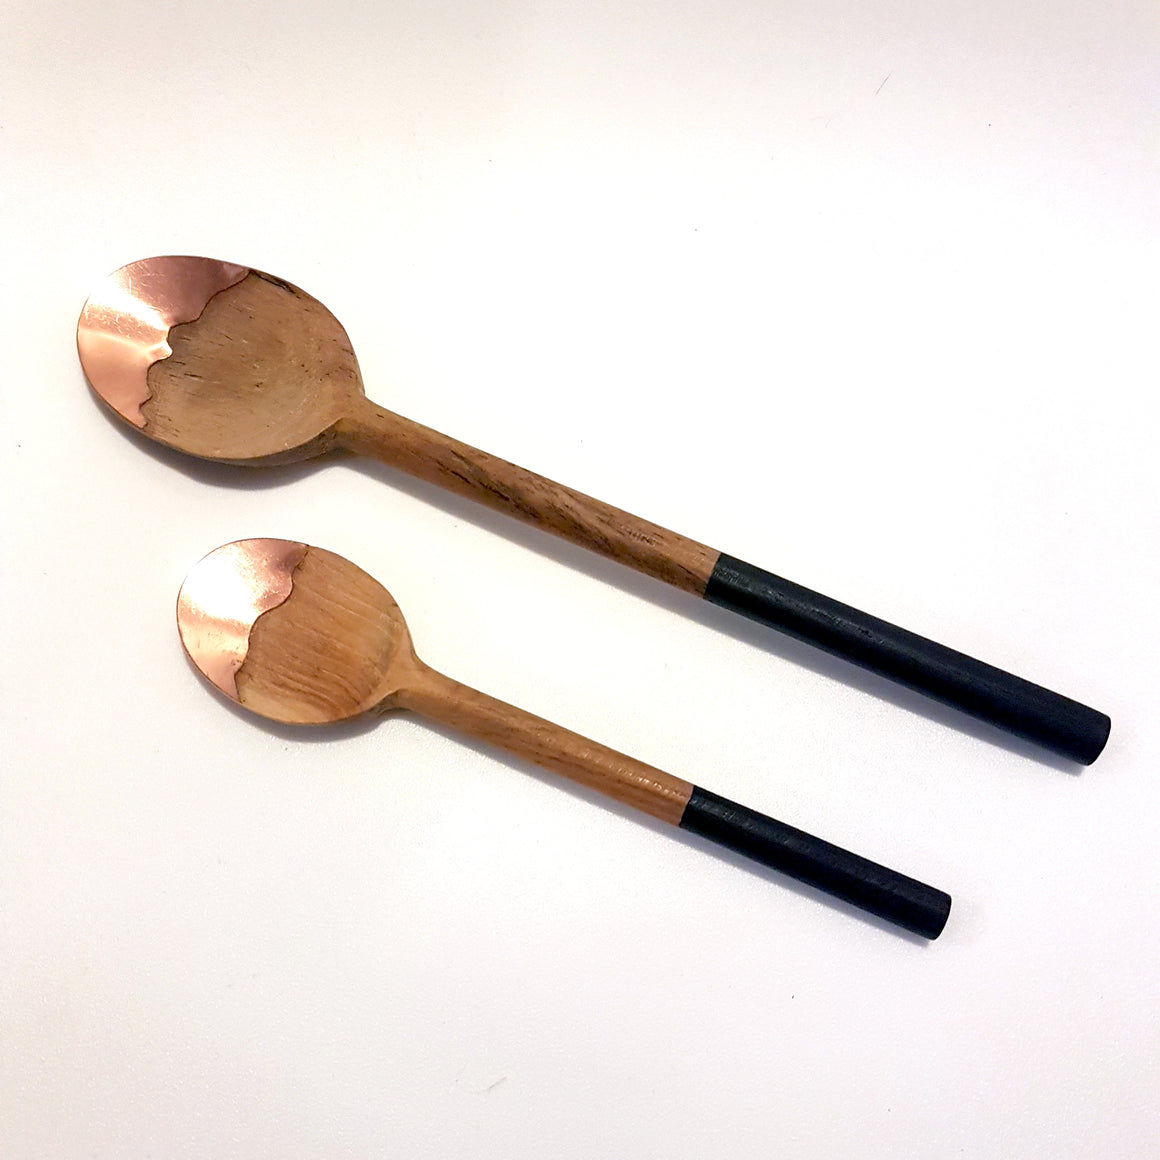 Small wooden spoon with copper tip